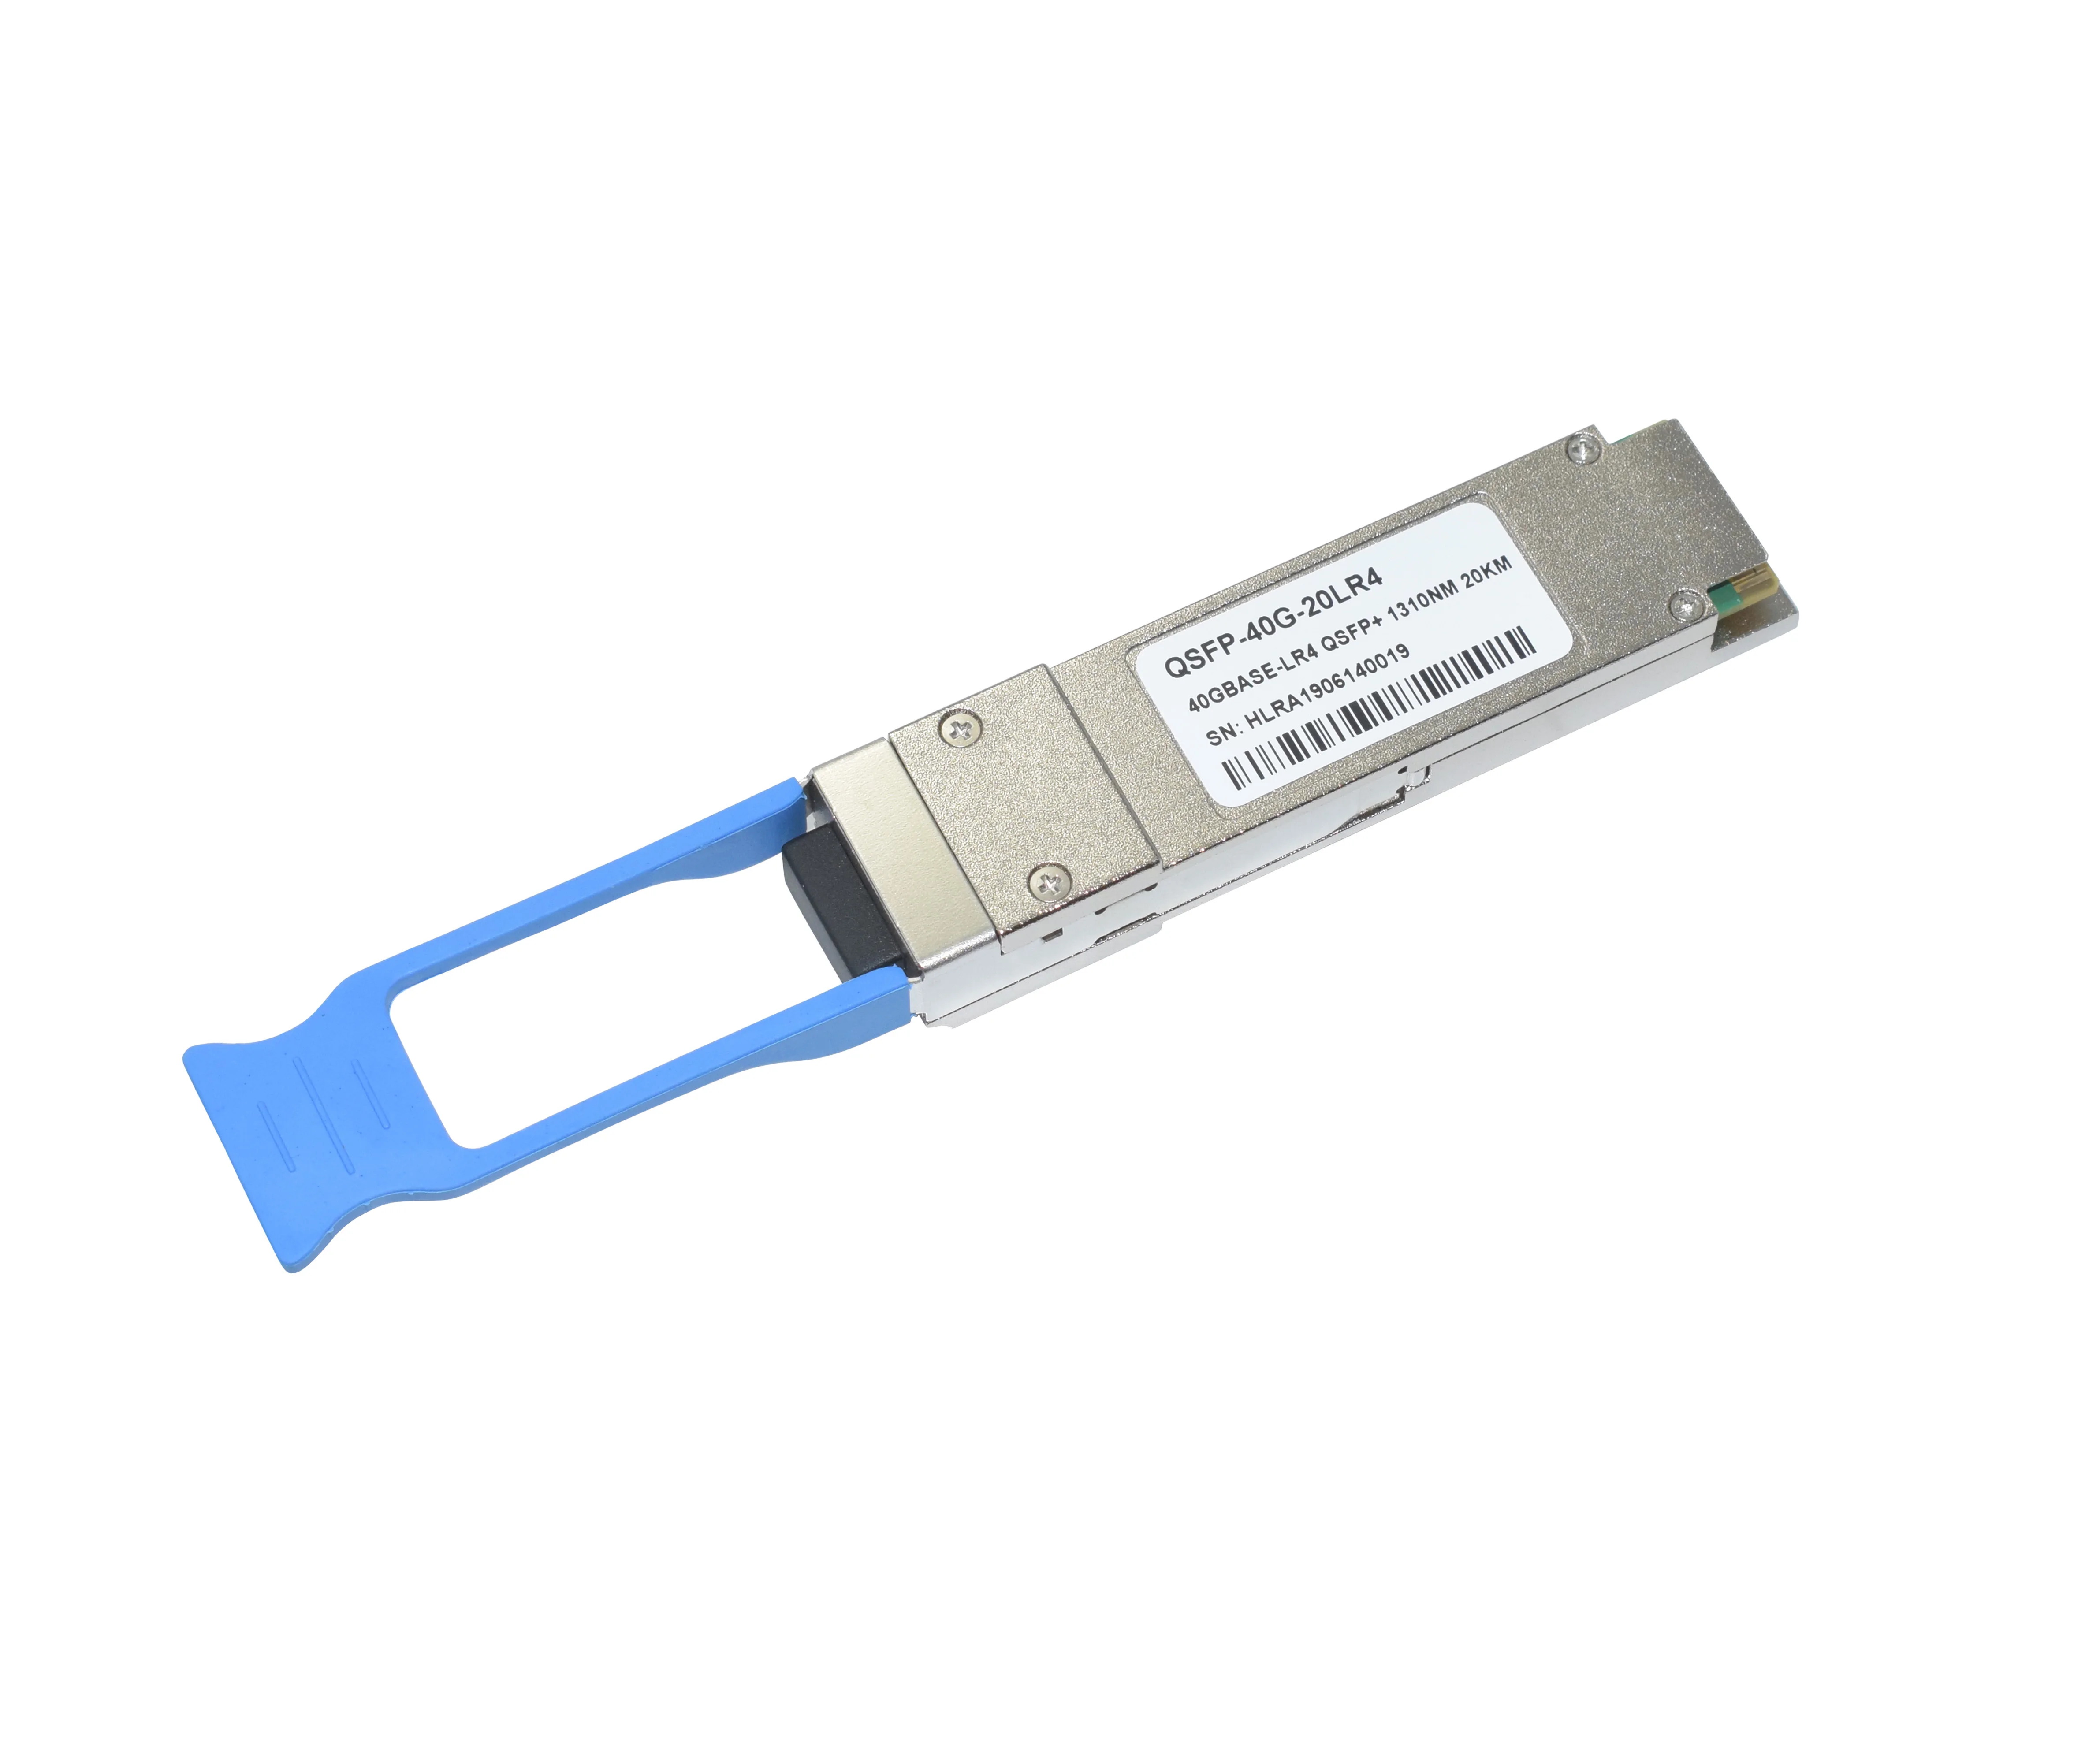 

China factory low price QSFP-40G-LR4 20KM 40G QSFP+ 40GBASE-LR4 SMF 1270~1330nm 1310nm 20KM LC compatible with Huawei